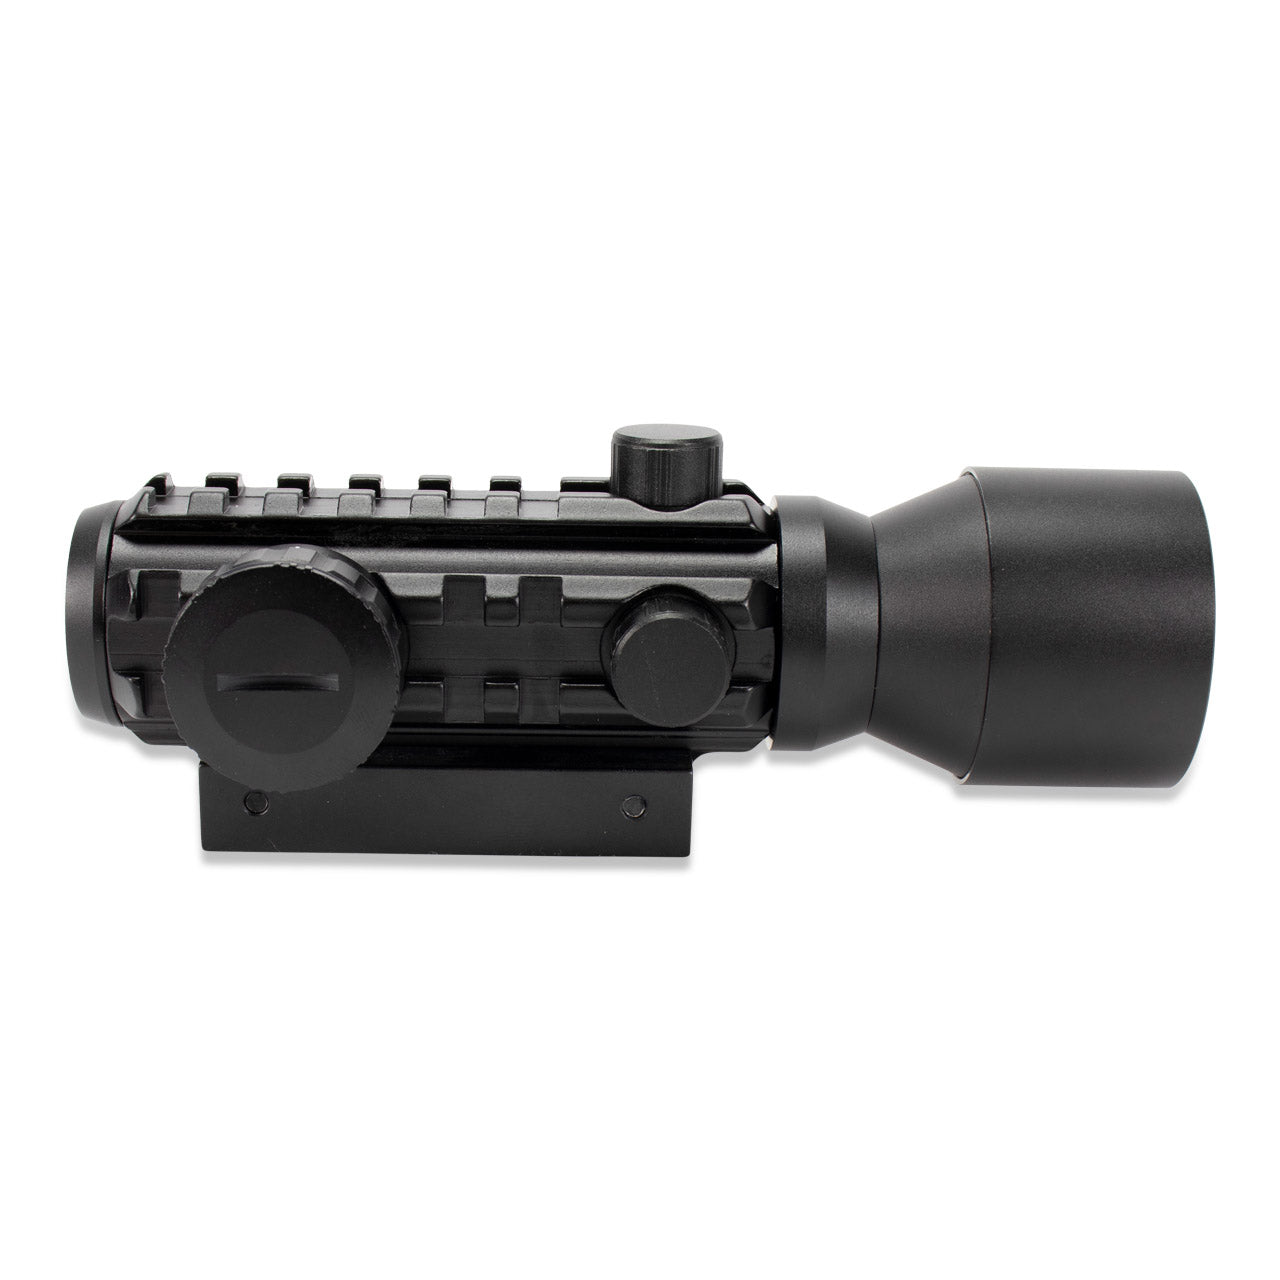 Element 2x42 Dual Illuminated Red Green Dot Scope with Triple Rails